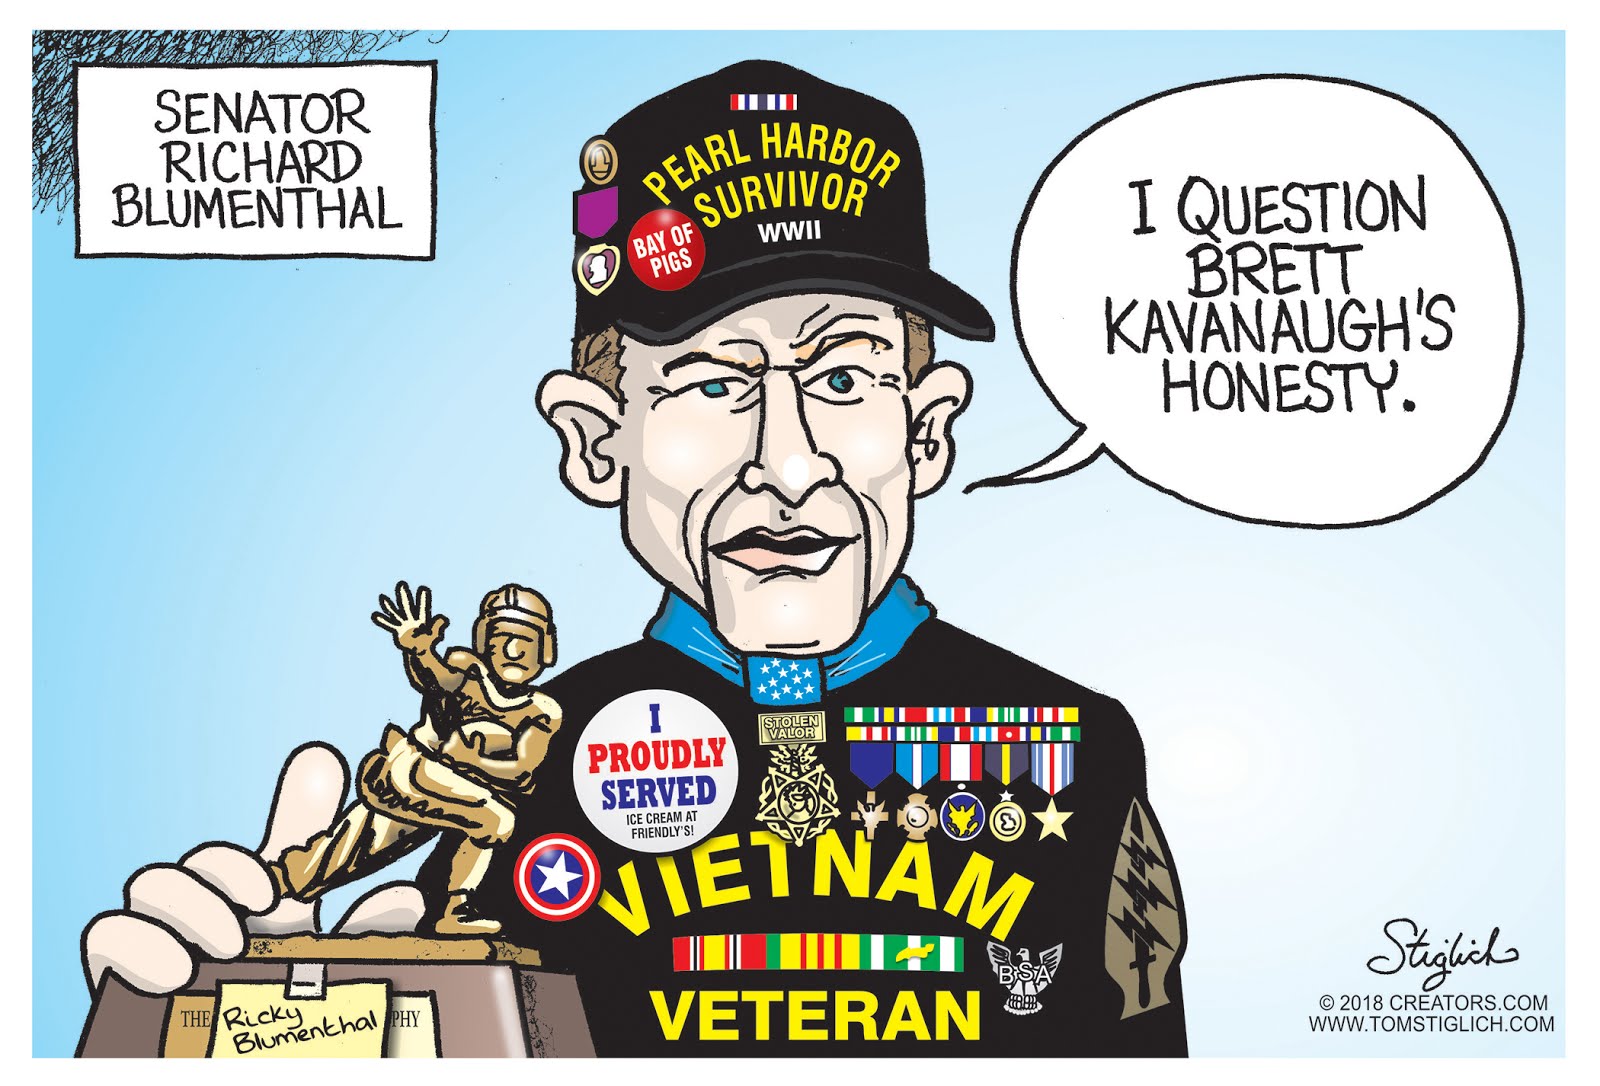 He did not serve in Vietnam. But he said he did ~